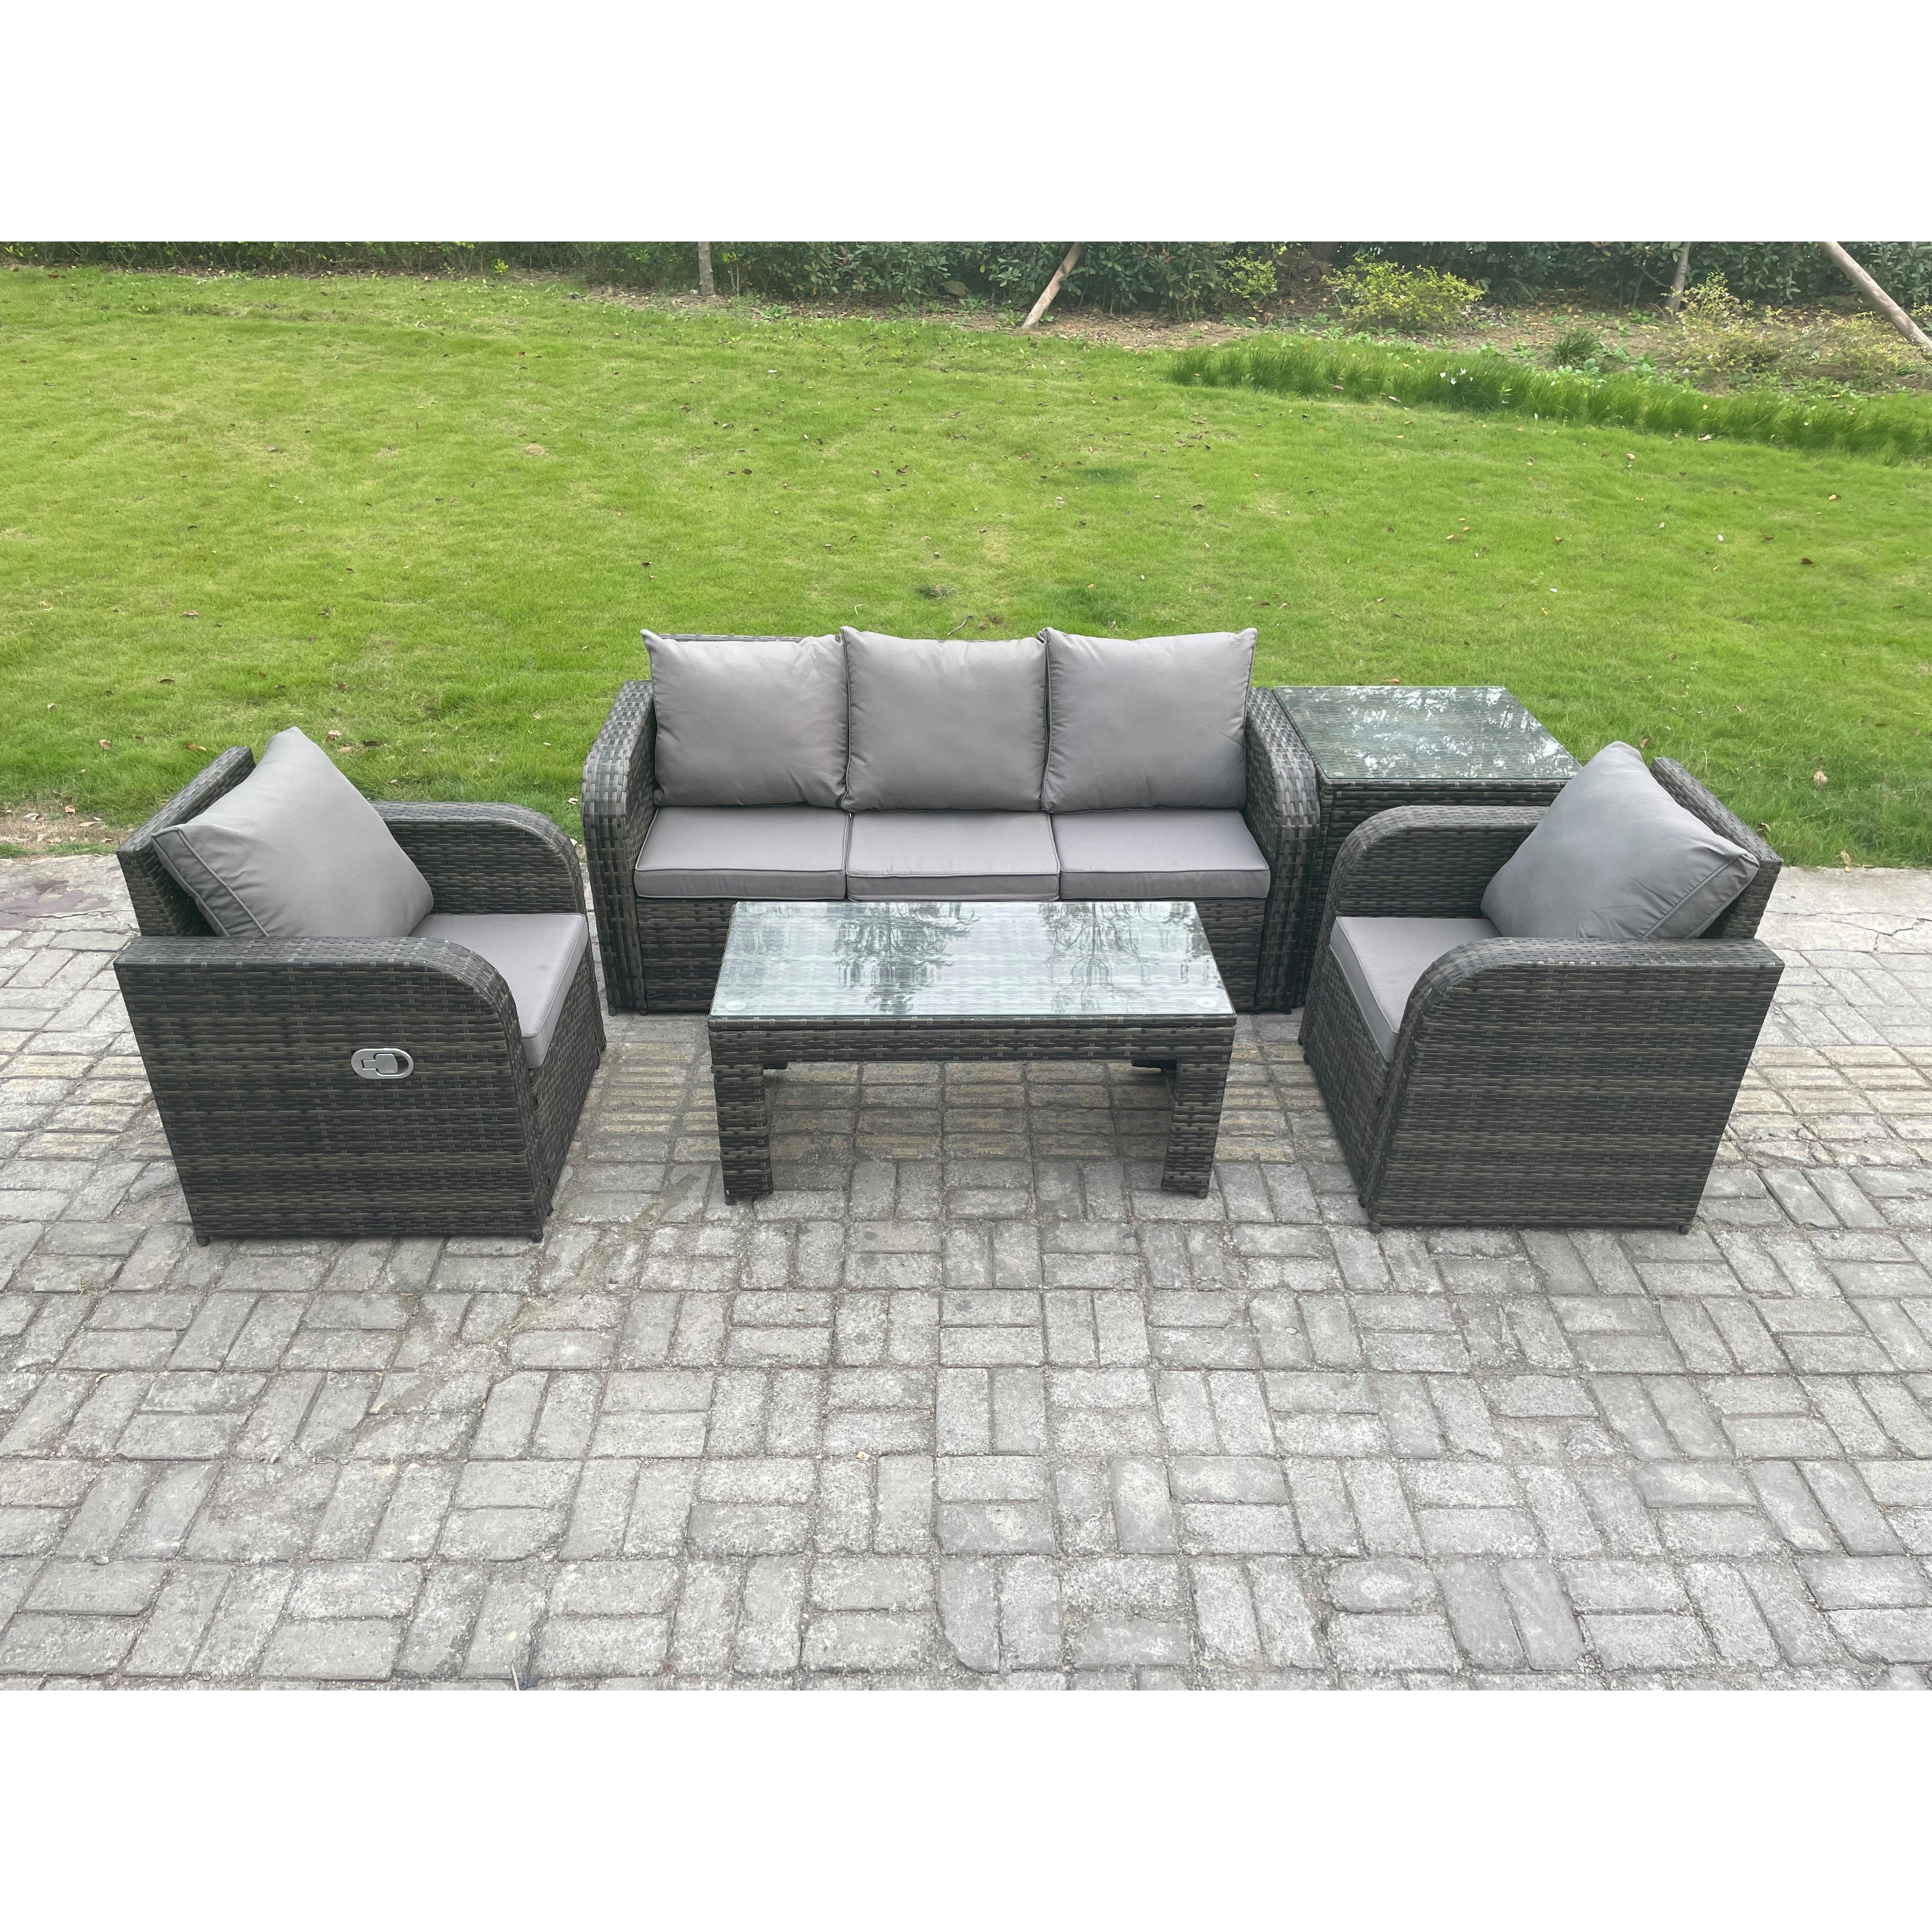 Wicker PE Rattan Garden Furniture Set Outdoor Lounge Sofa Set with Reclining Chair Coffee Table Side Table - image 1